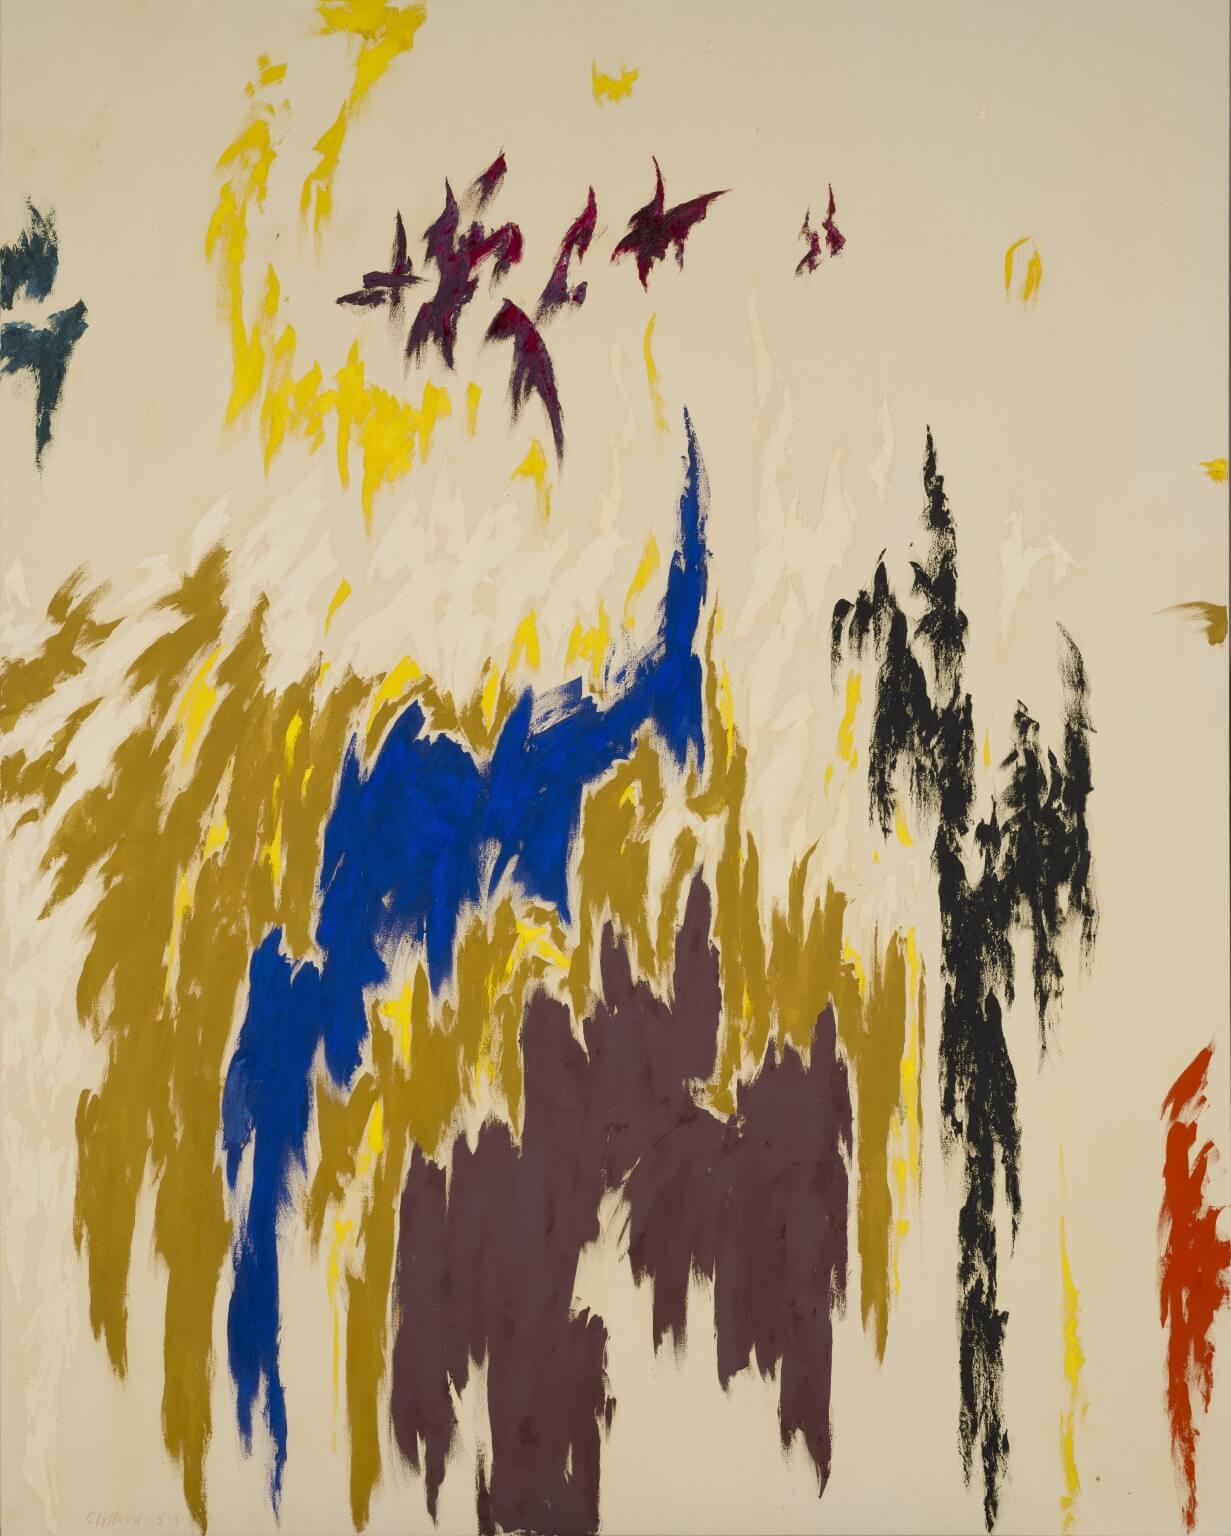 Abstract painting with large sections of bare canvas and explosions of different paint colors including gold, blue, brown, black, yellow, dark red, and bright red